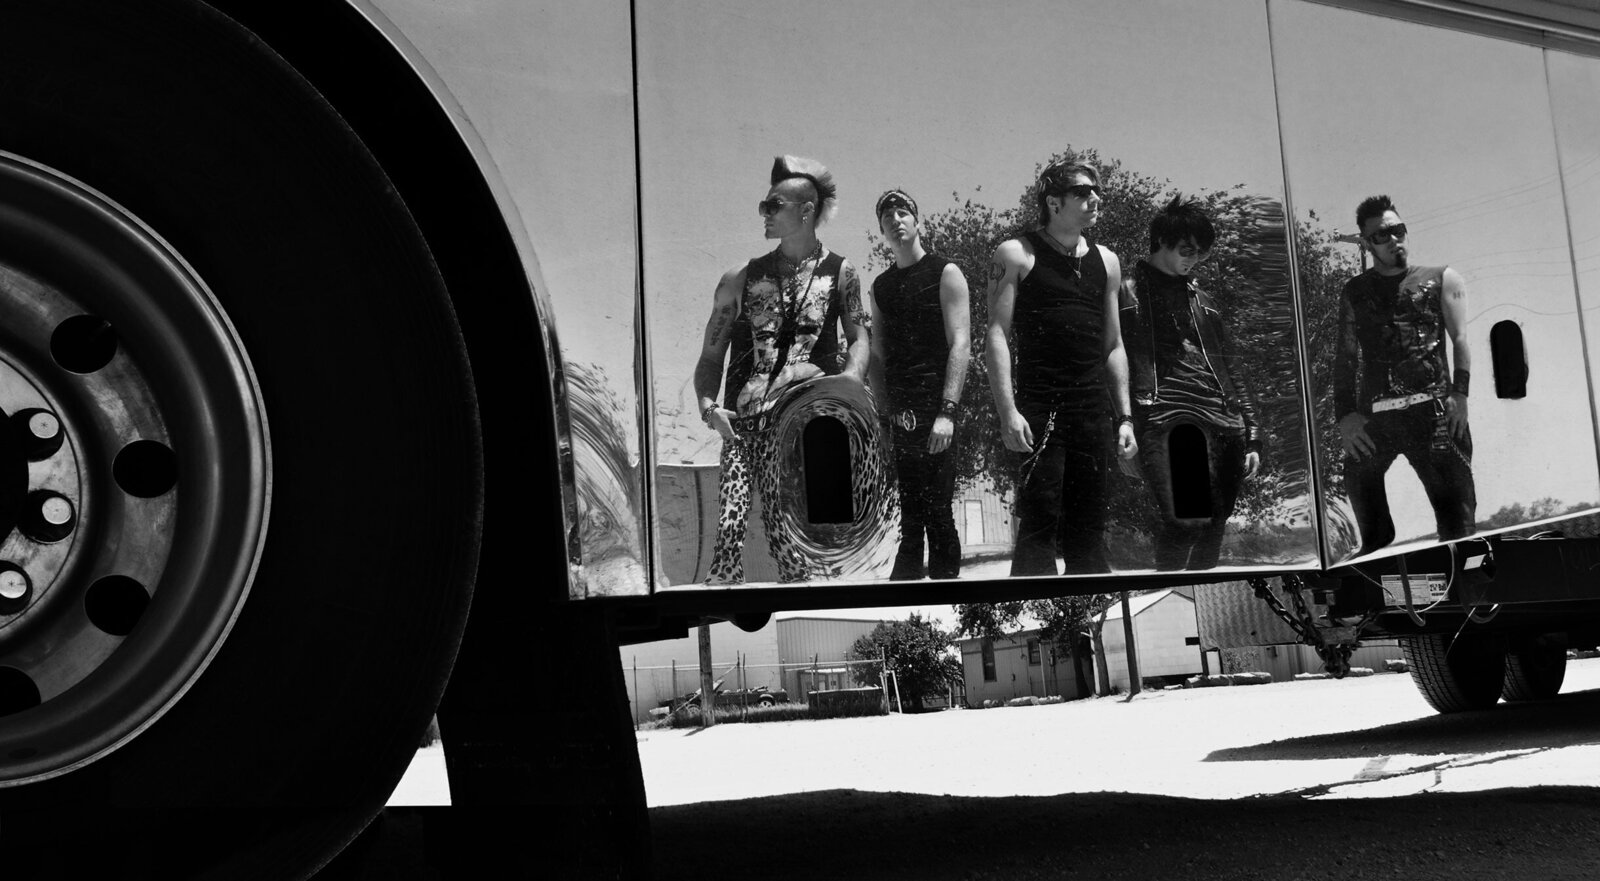 Band portrait black and white My Darkest Days reflections of all five members in car door